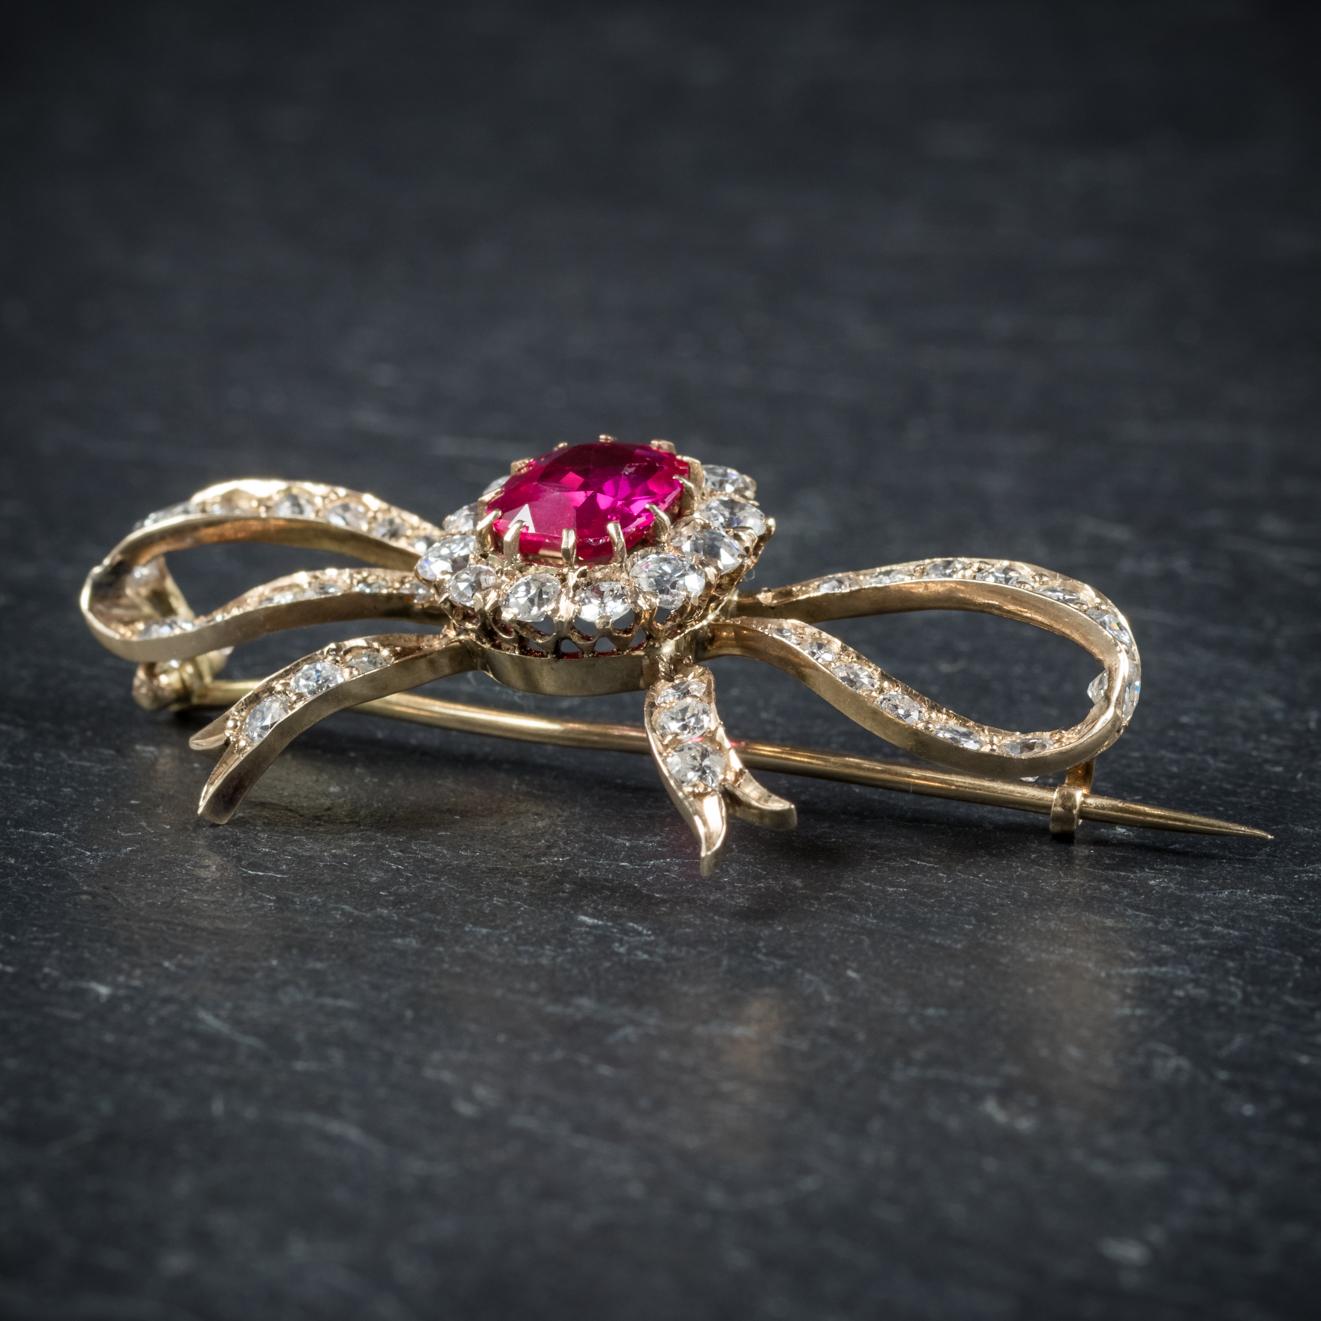 Women's Antique Edwardian Diamond Verneuil Ruby 18 Carat Gold circa 1910 Brooch For Sale